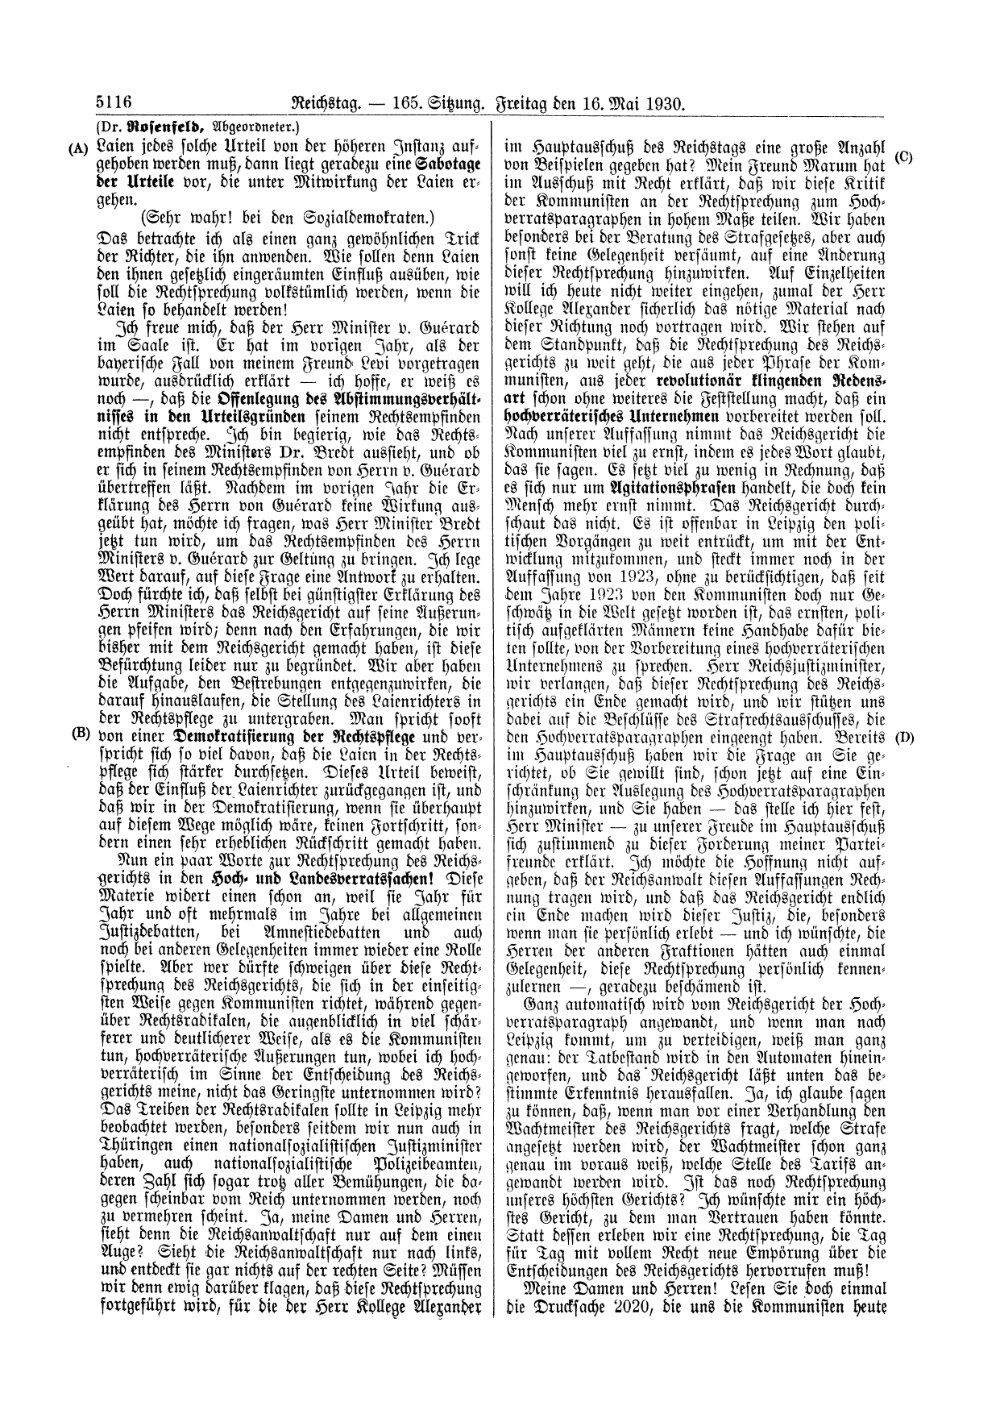 Scan of page 5116